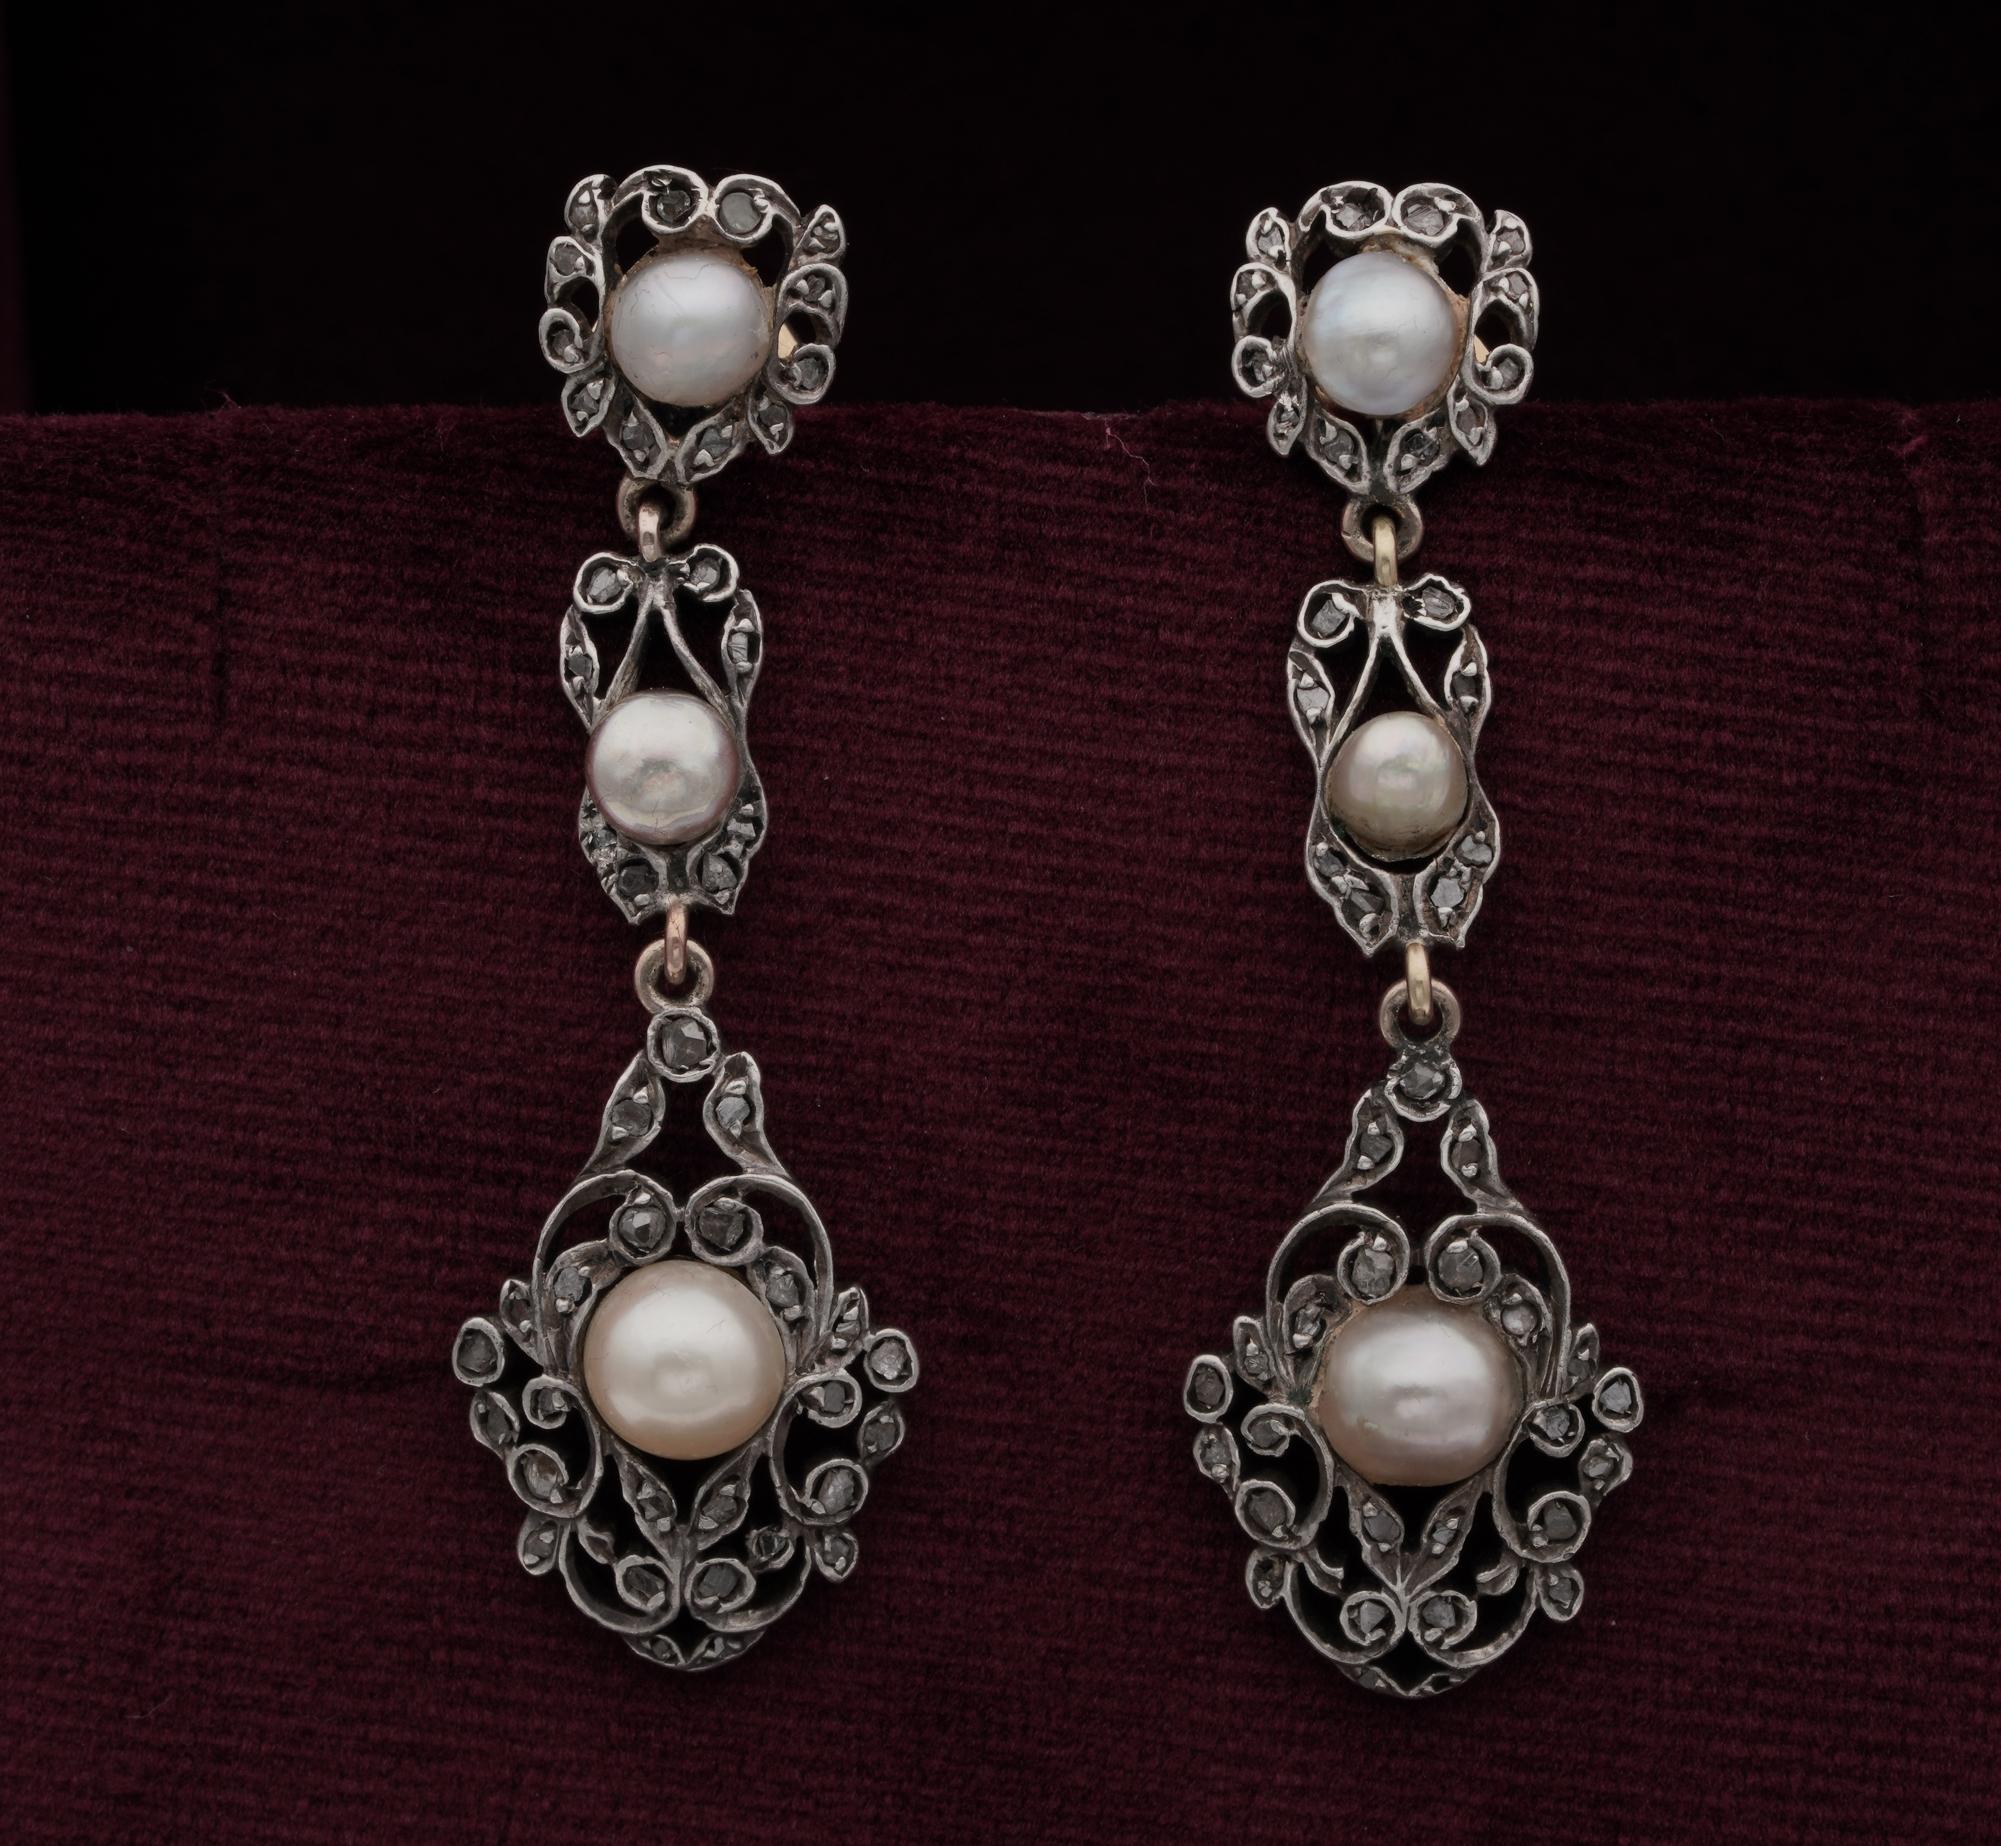 Step into History
beautiful pair of long drop earrings – 1800 ca – Hand crafted of solid 18 Kt gold topped by silver
Exquisite minute scroll work like an antique trim, fully enhanced by tiny rose cut Diamonds complementing a trio of Pearls set along